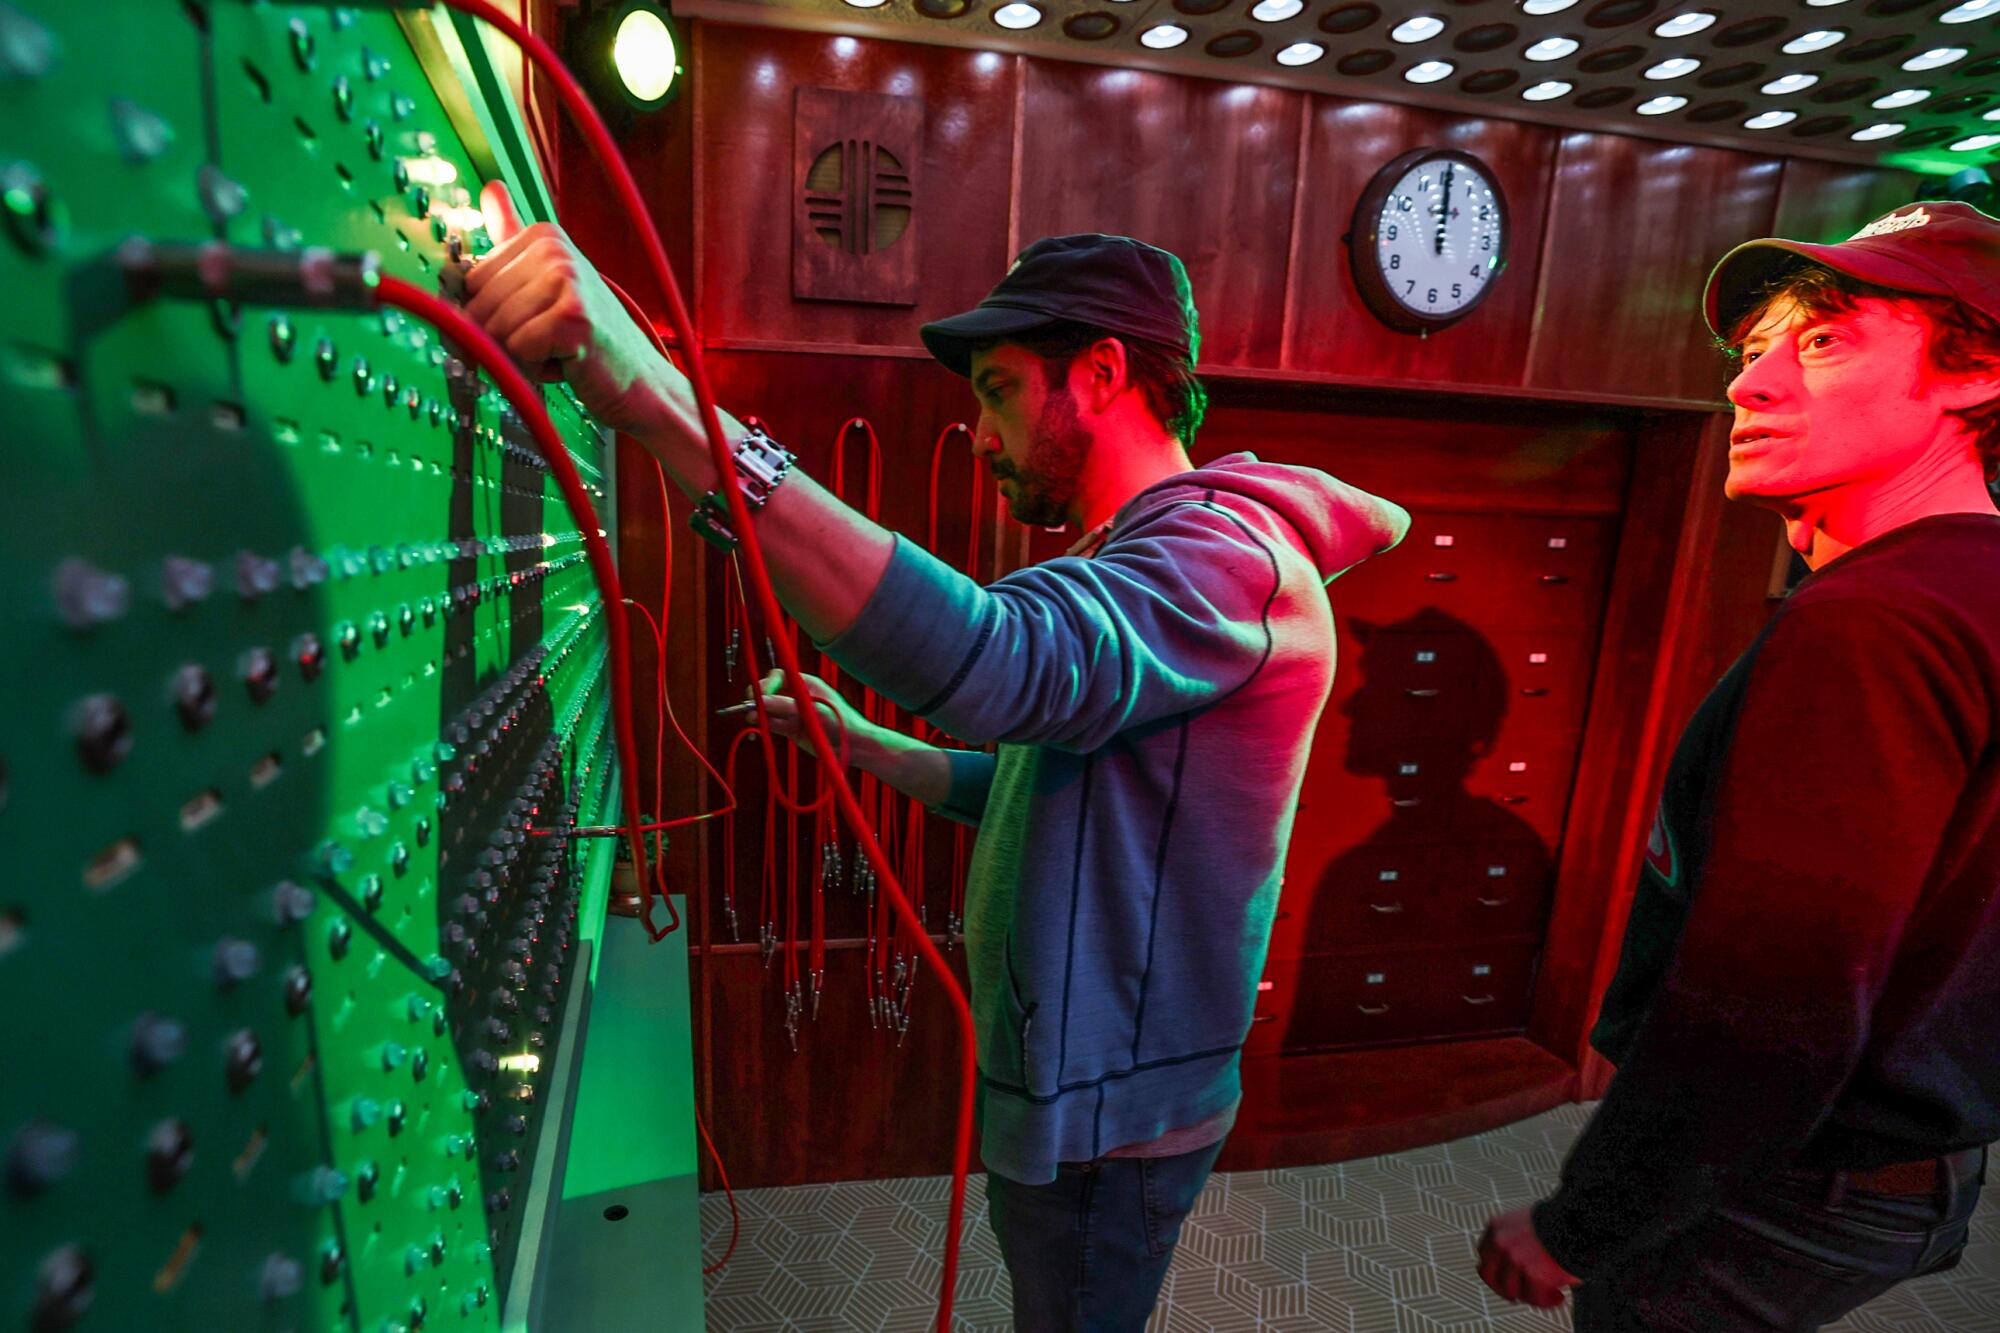 Tommy Wallach, right, and Terry Pettigrew-Rolapp, left, putting plugs into a switchboard in an escape room.